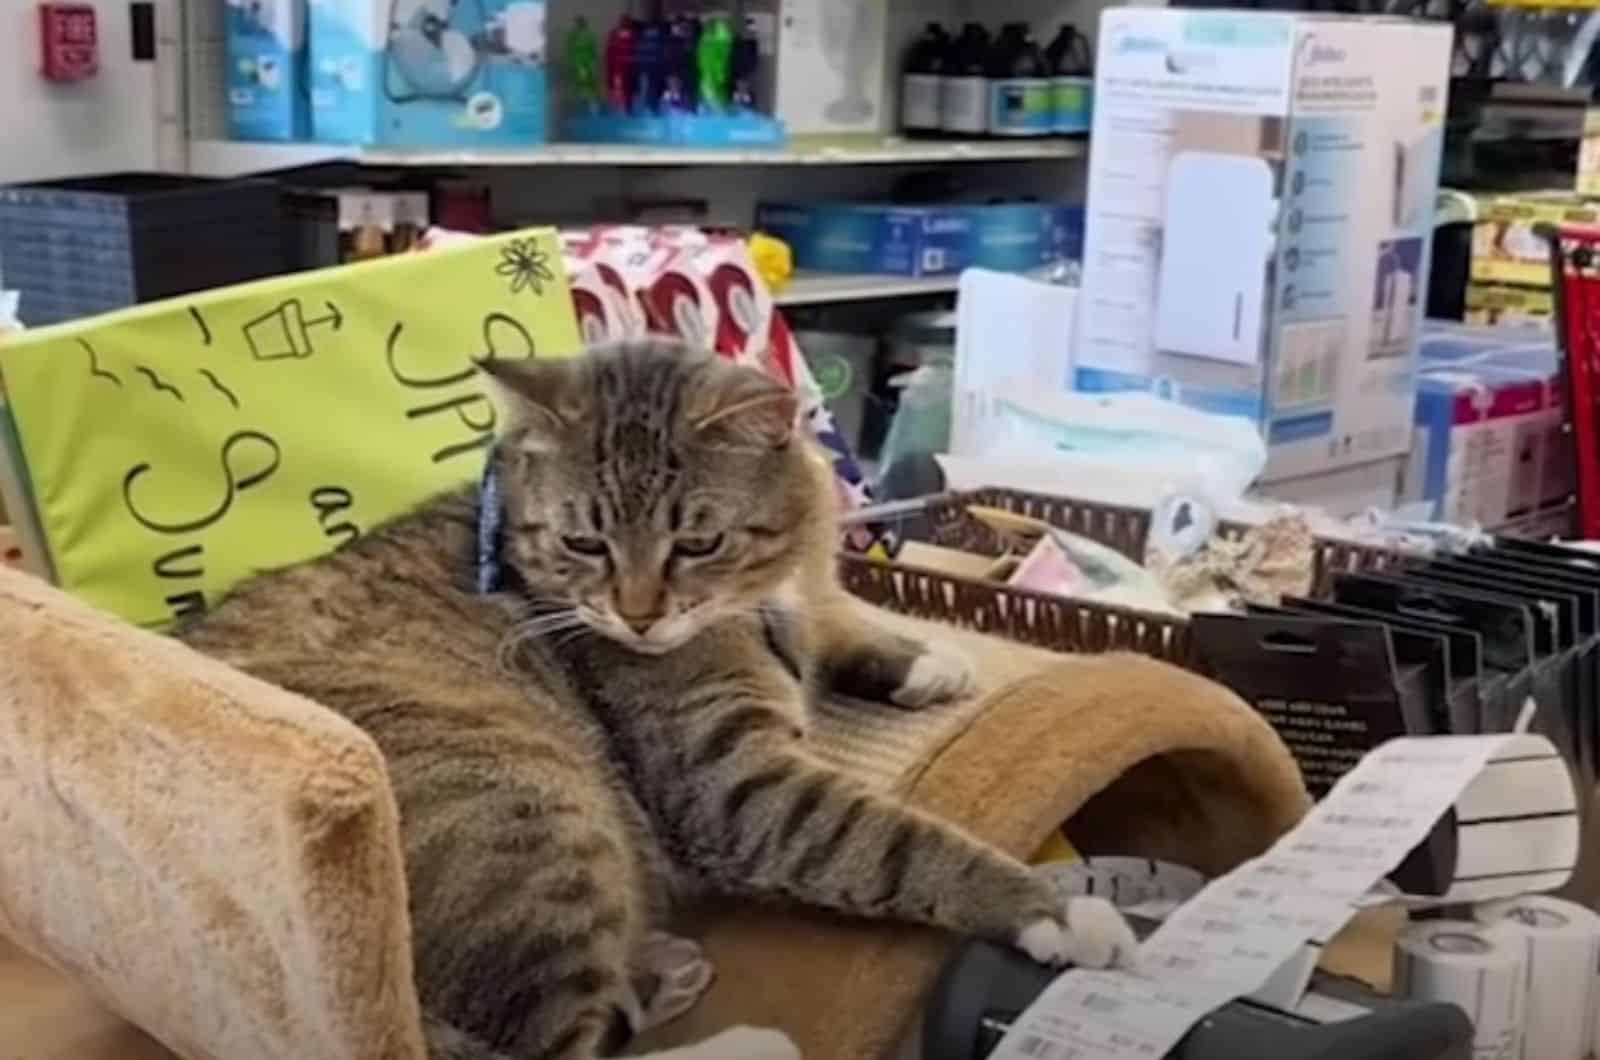 the cat is lying on the armchair in the store